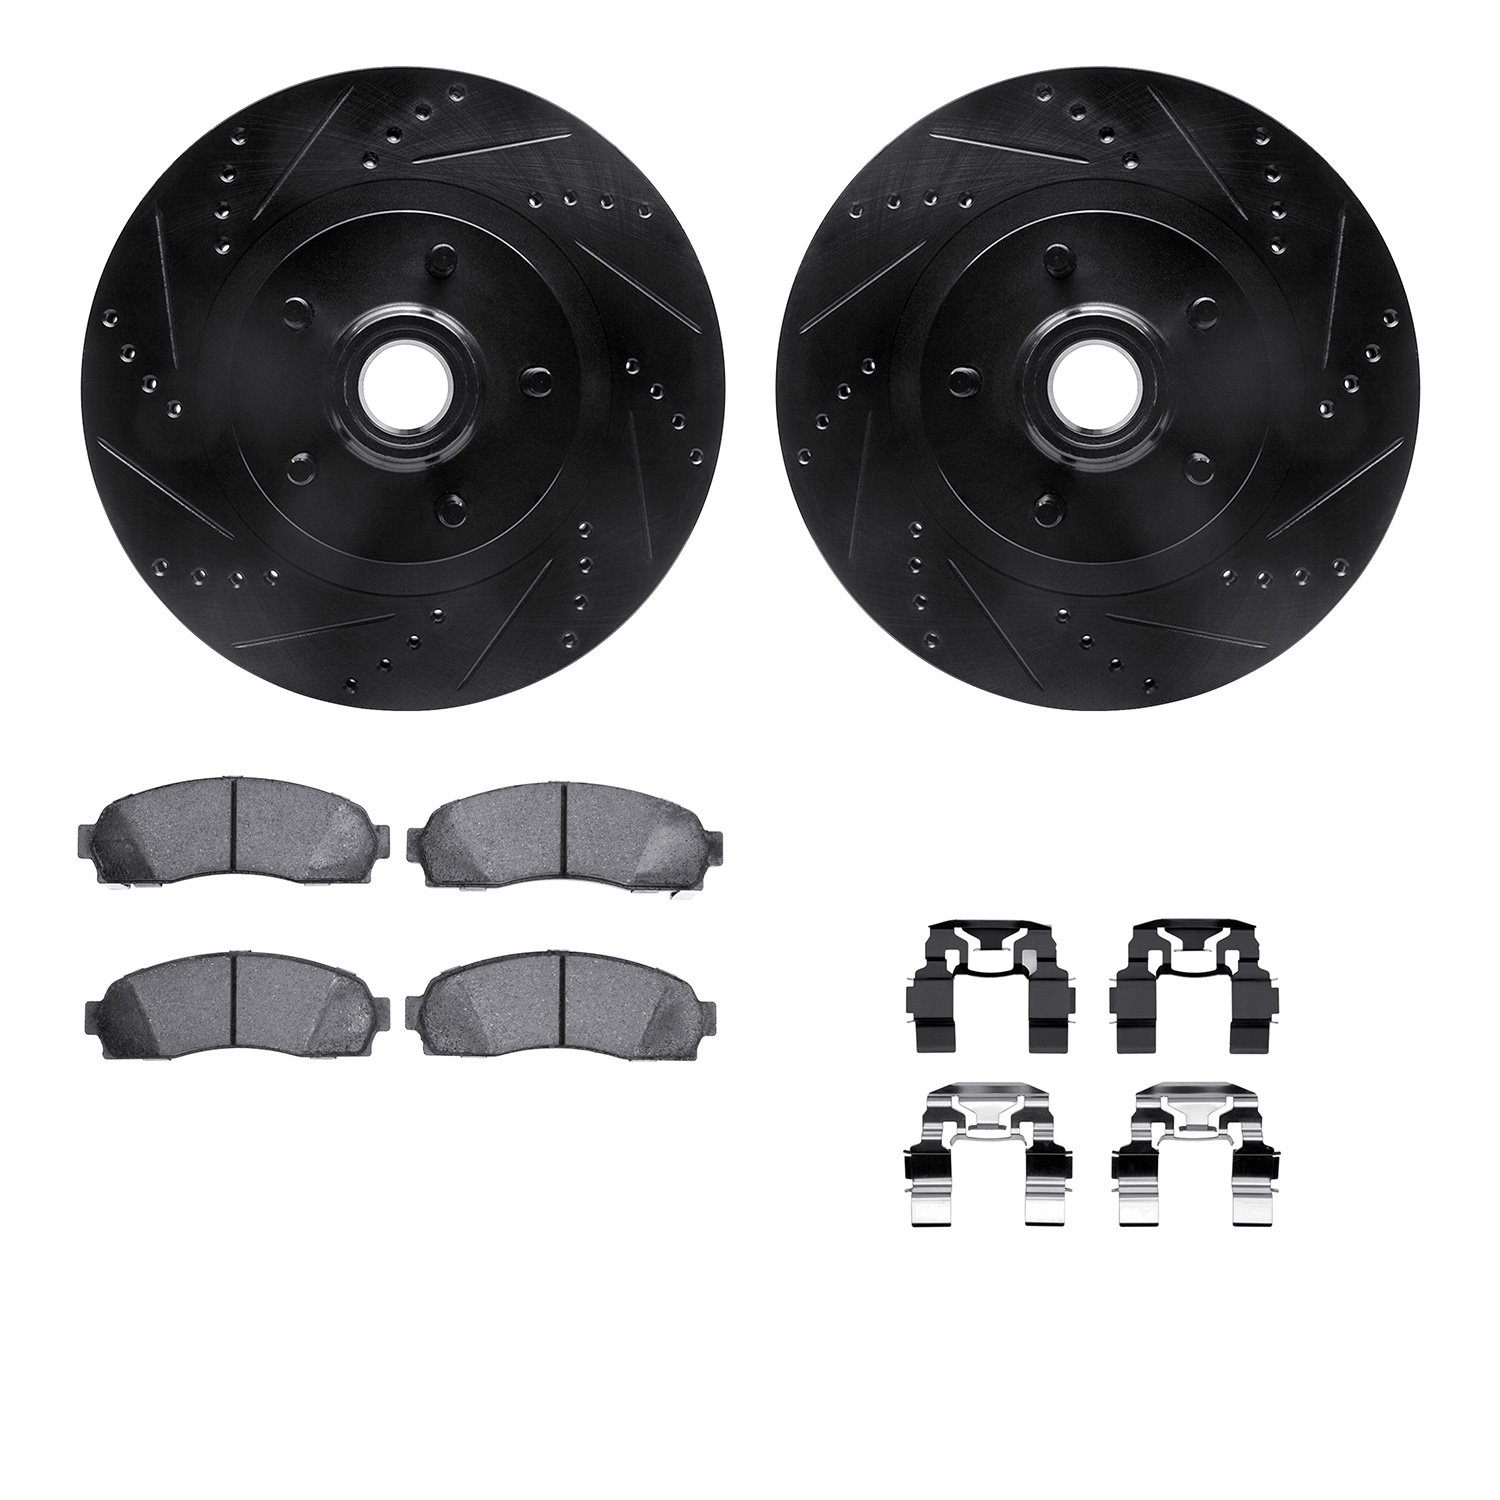 8412-54060 Drilled/Slotted Brake Rotors with Ultimate-Duty Brake Pads Kit & Hardware [Black], 2001-2005 Ford/Lincoln/Mercury/Maz